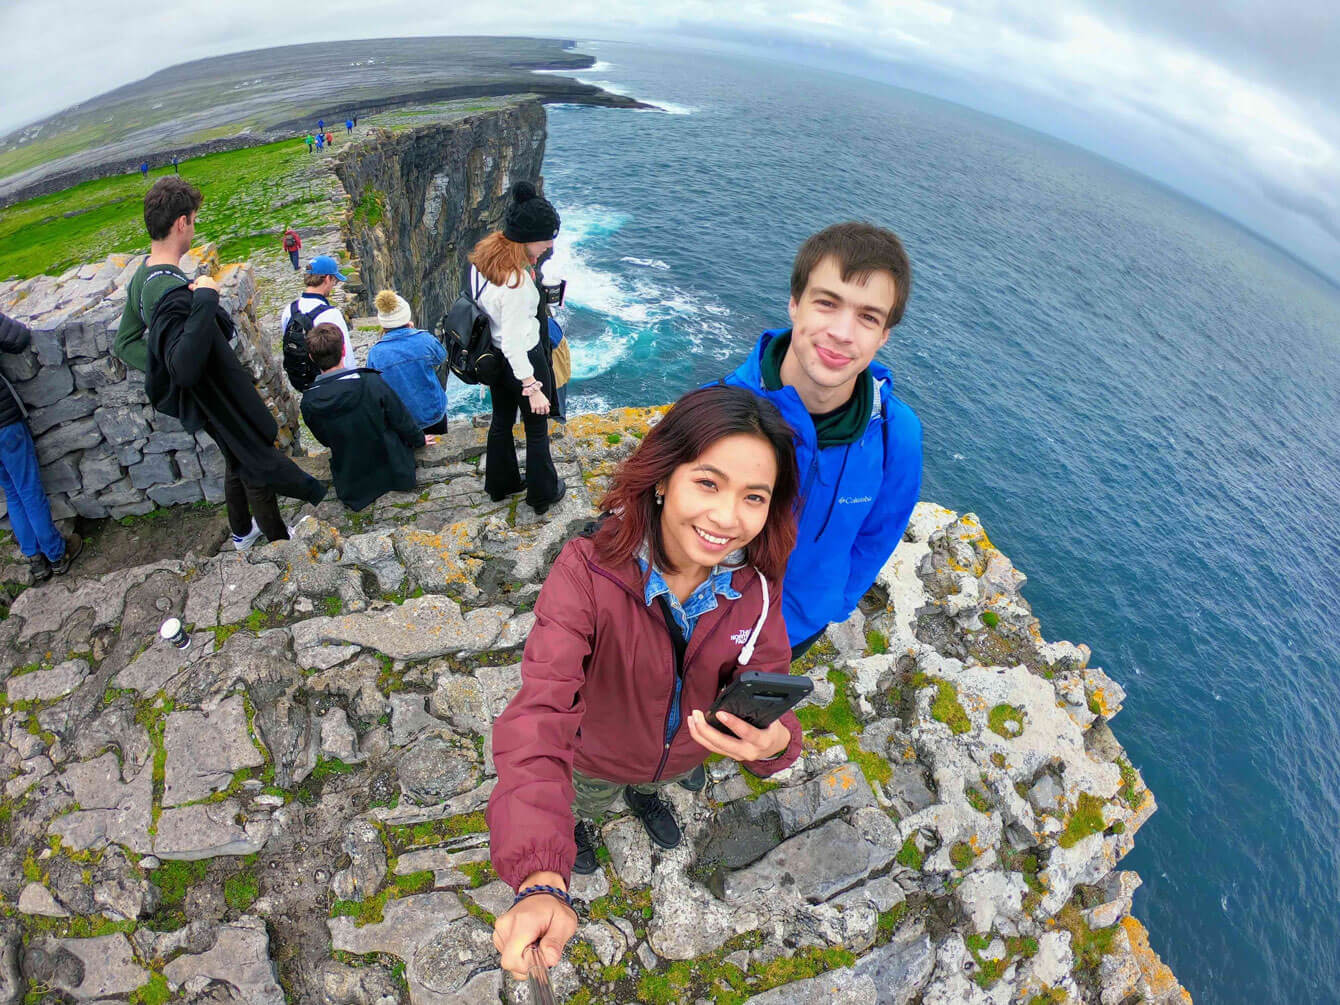 Two students taking a selfie in Ireland on a cliff overlooking water.